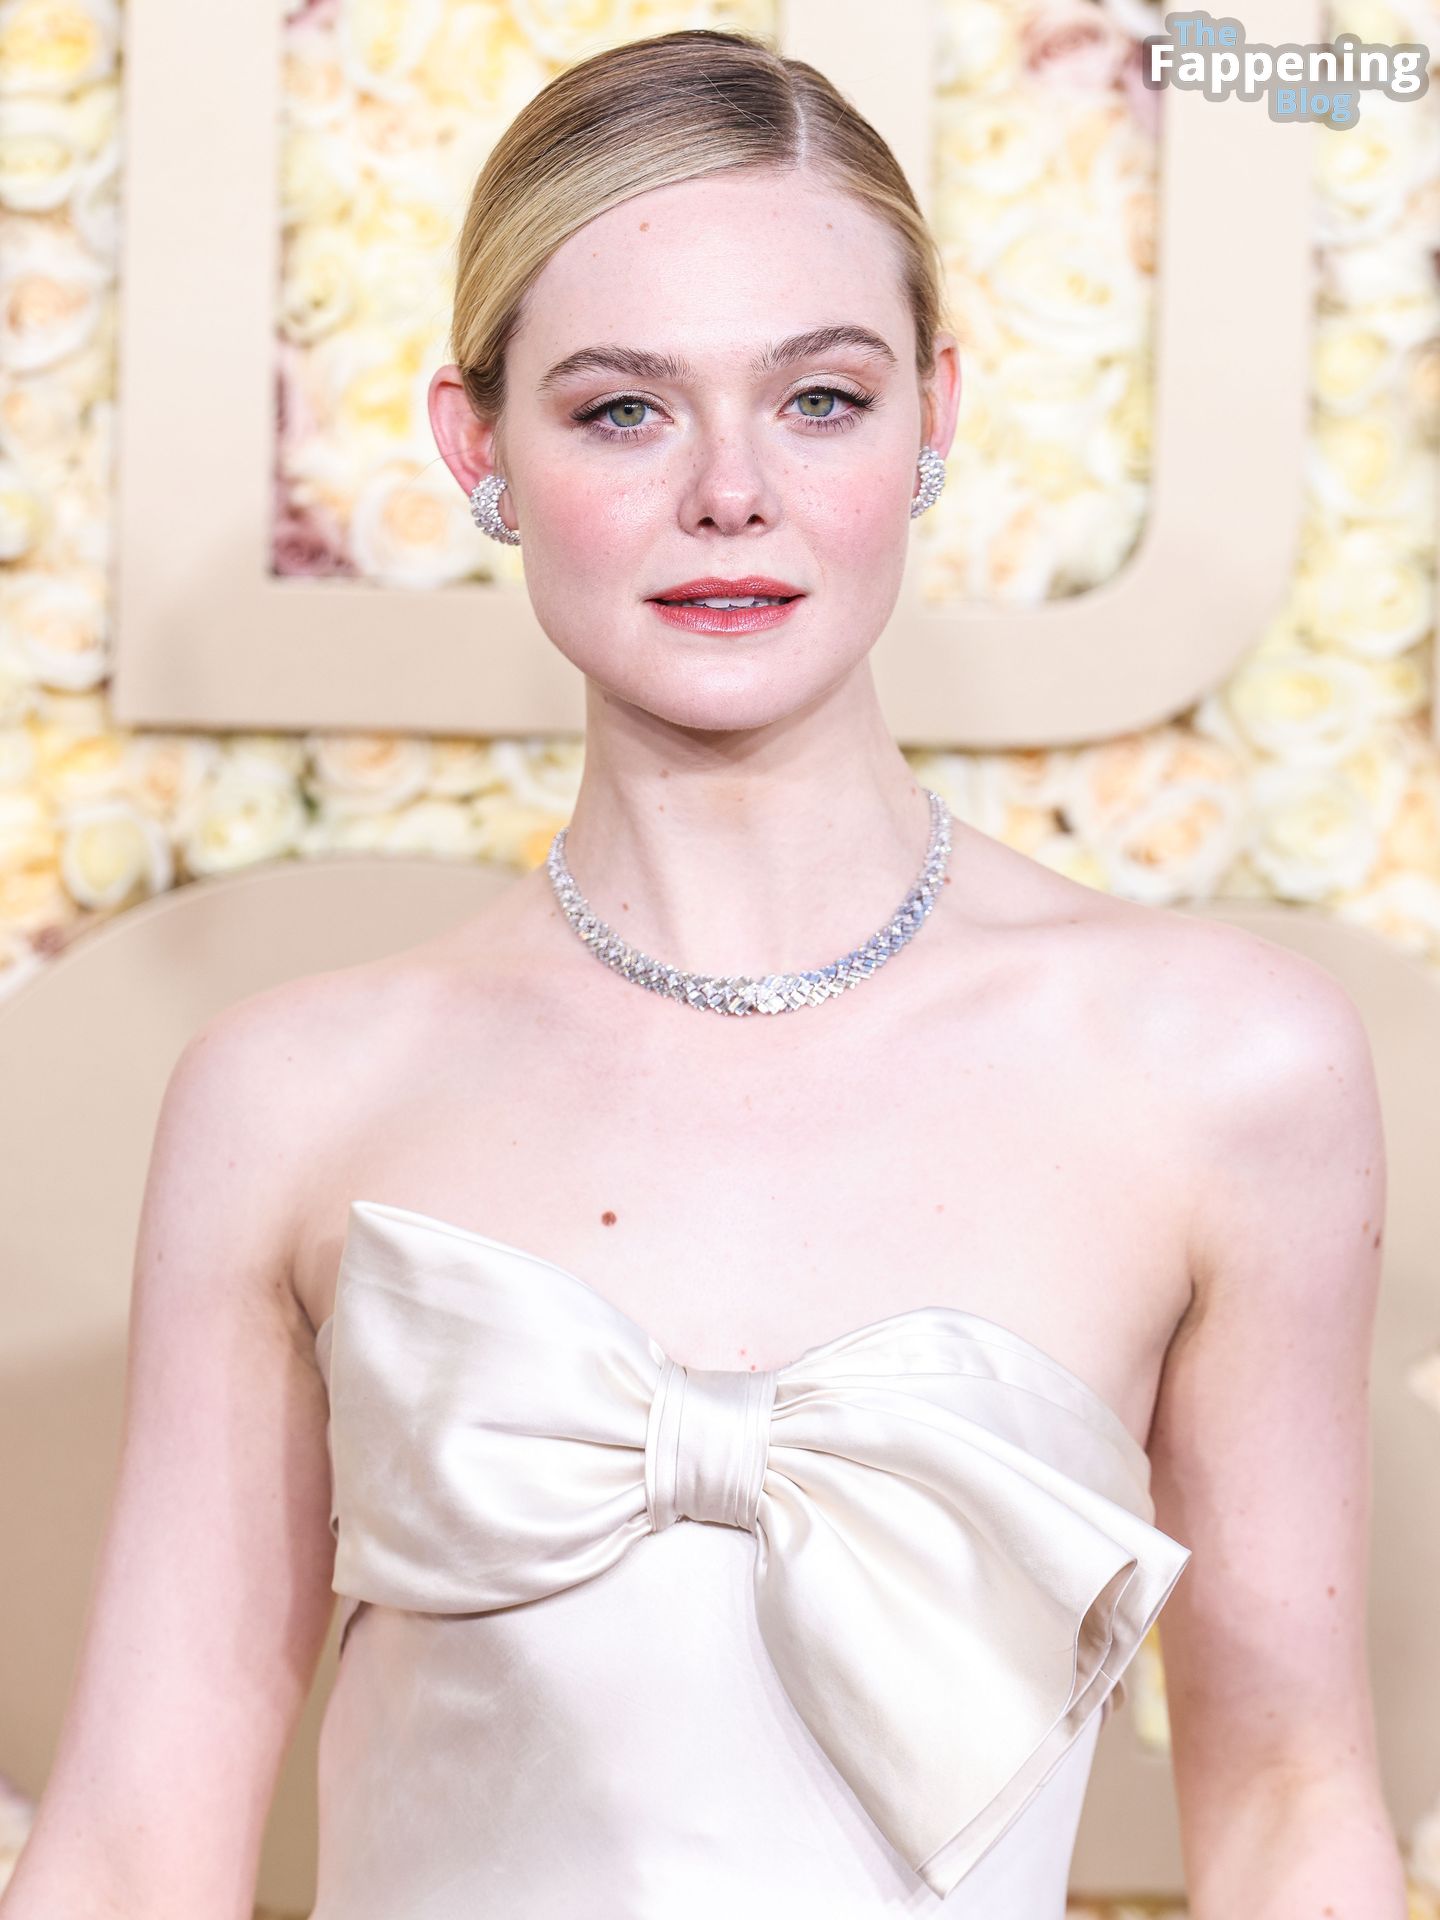 Elle-Fanning-Sexy-85-The-Fappening-Blog.jpg